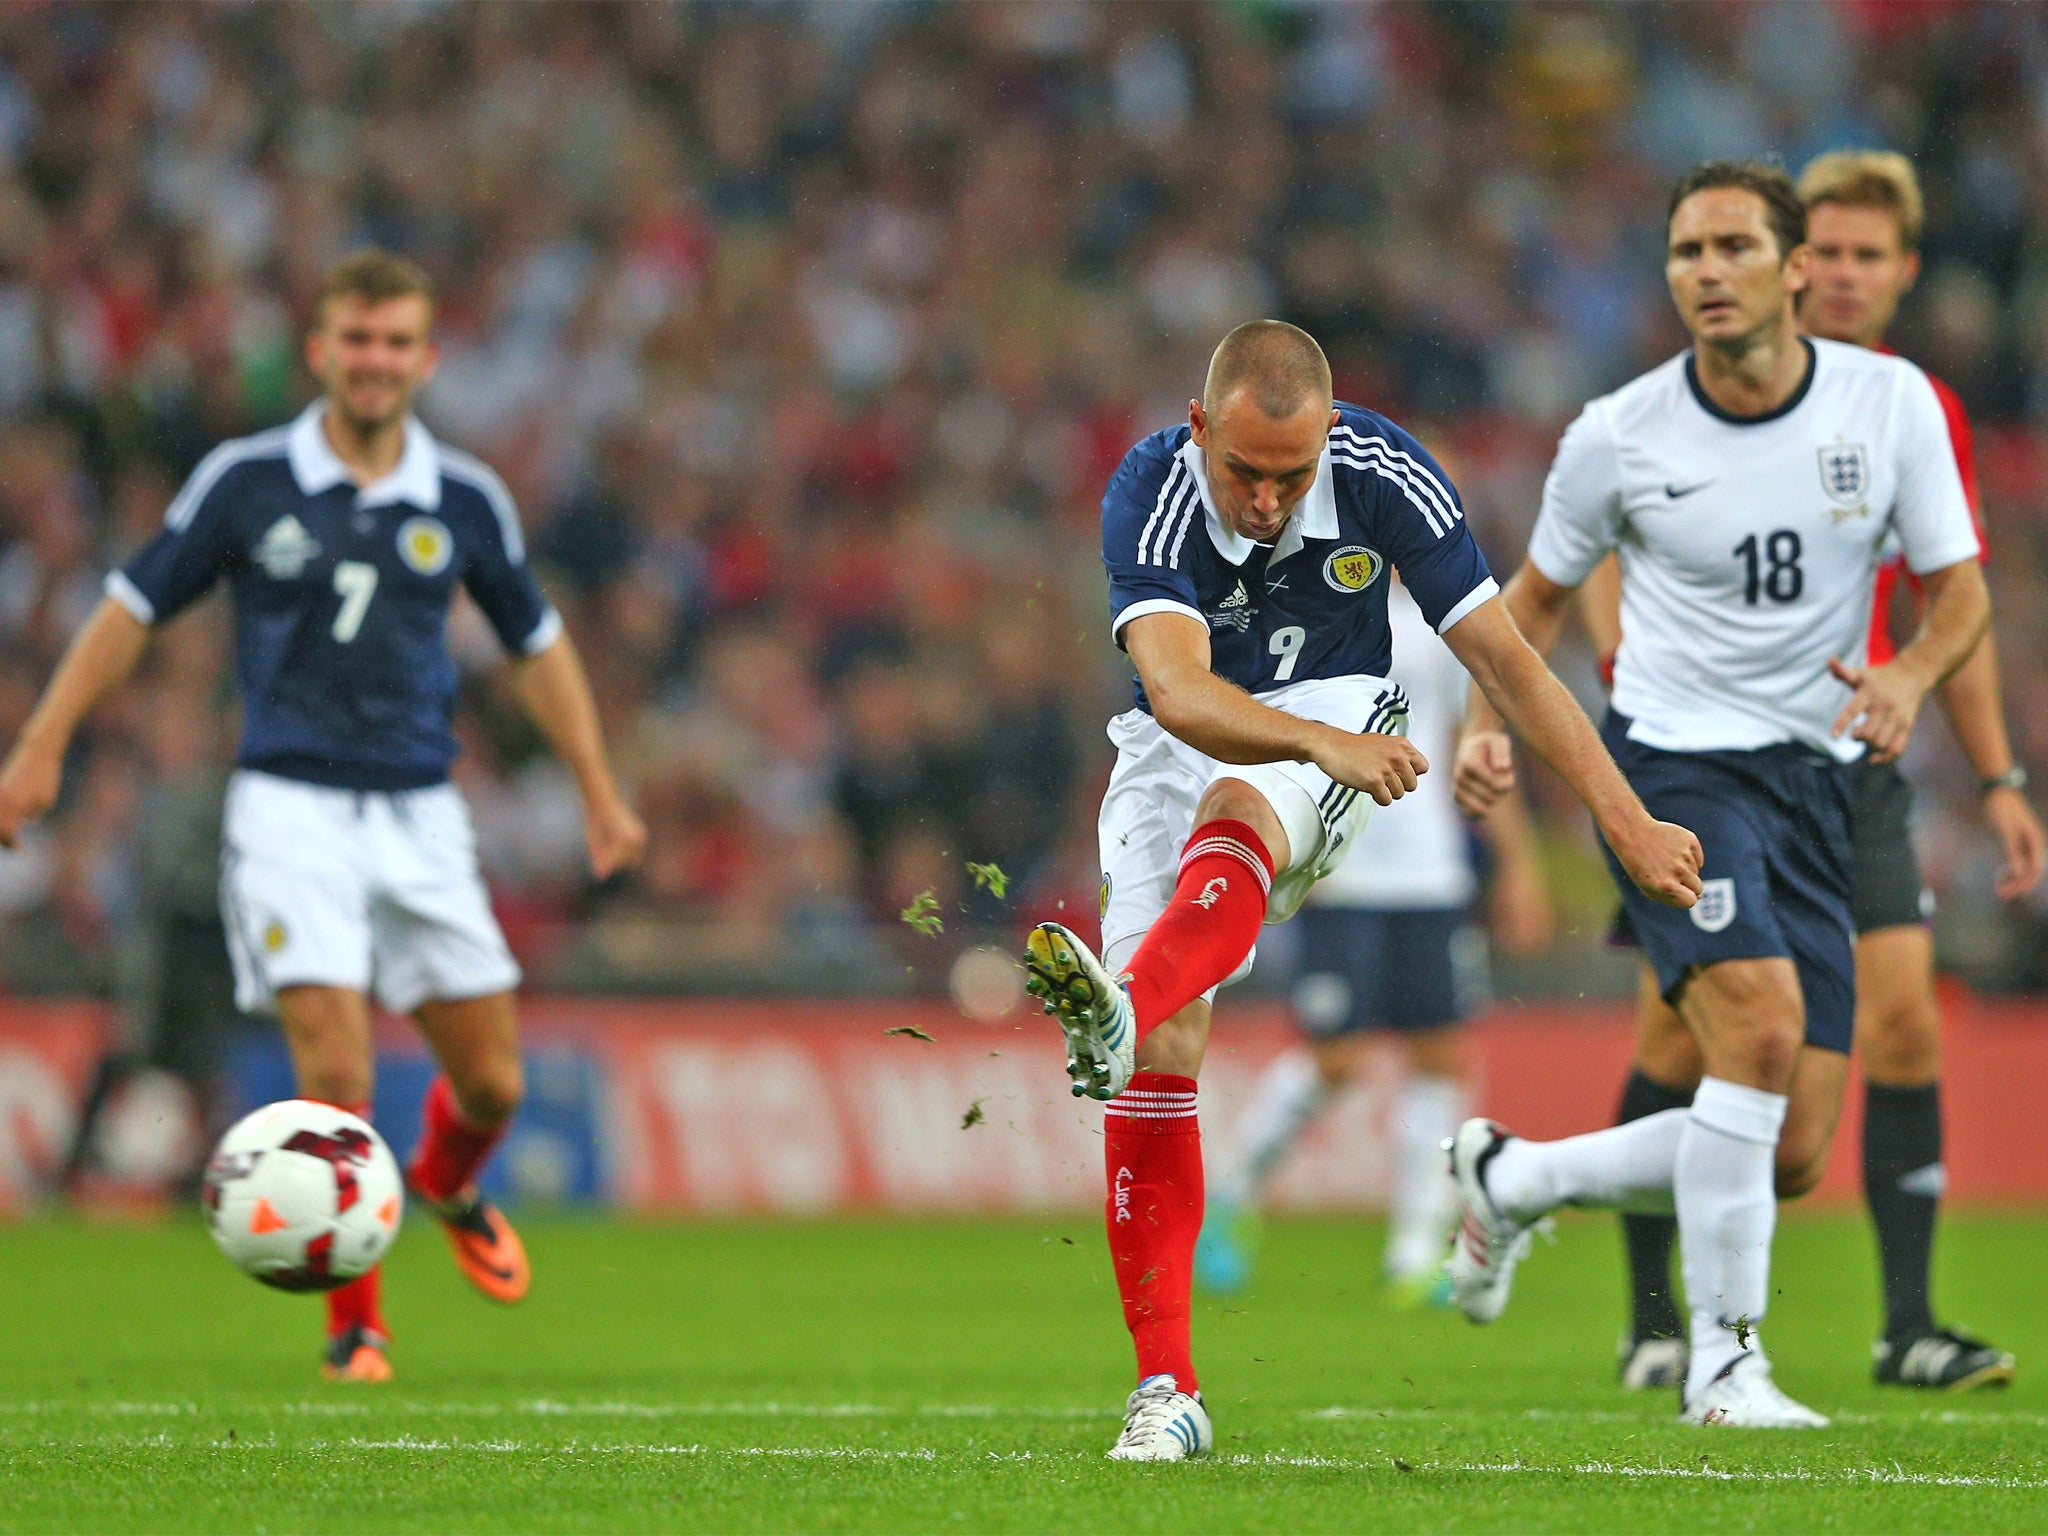 Kenny Miller's thumping finish gives Scotland their second surprise lead of the night